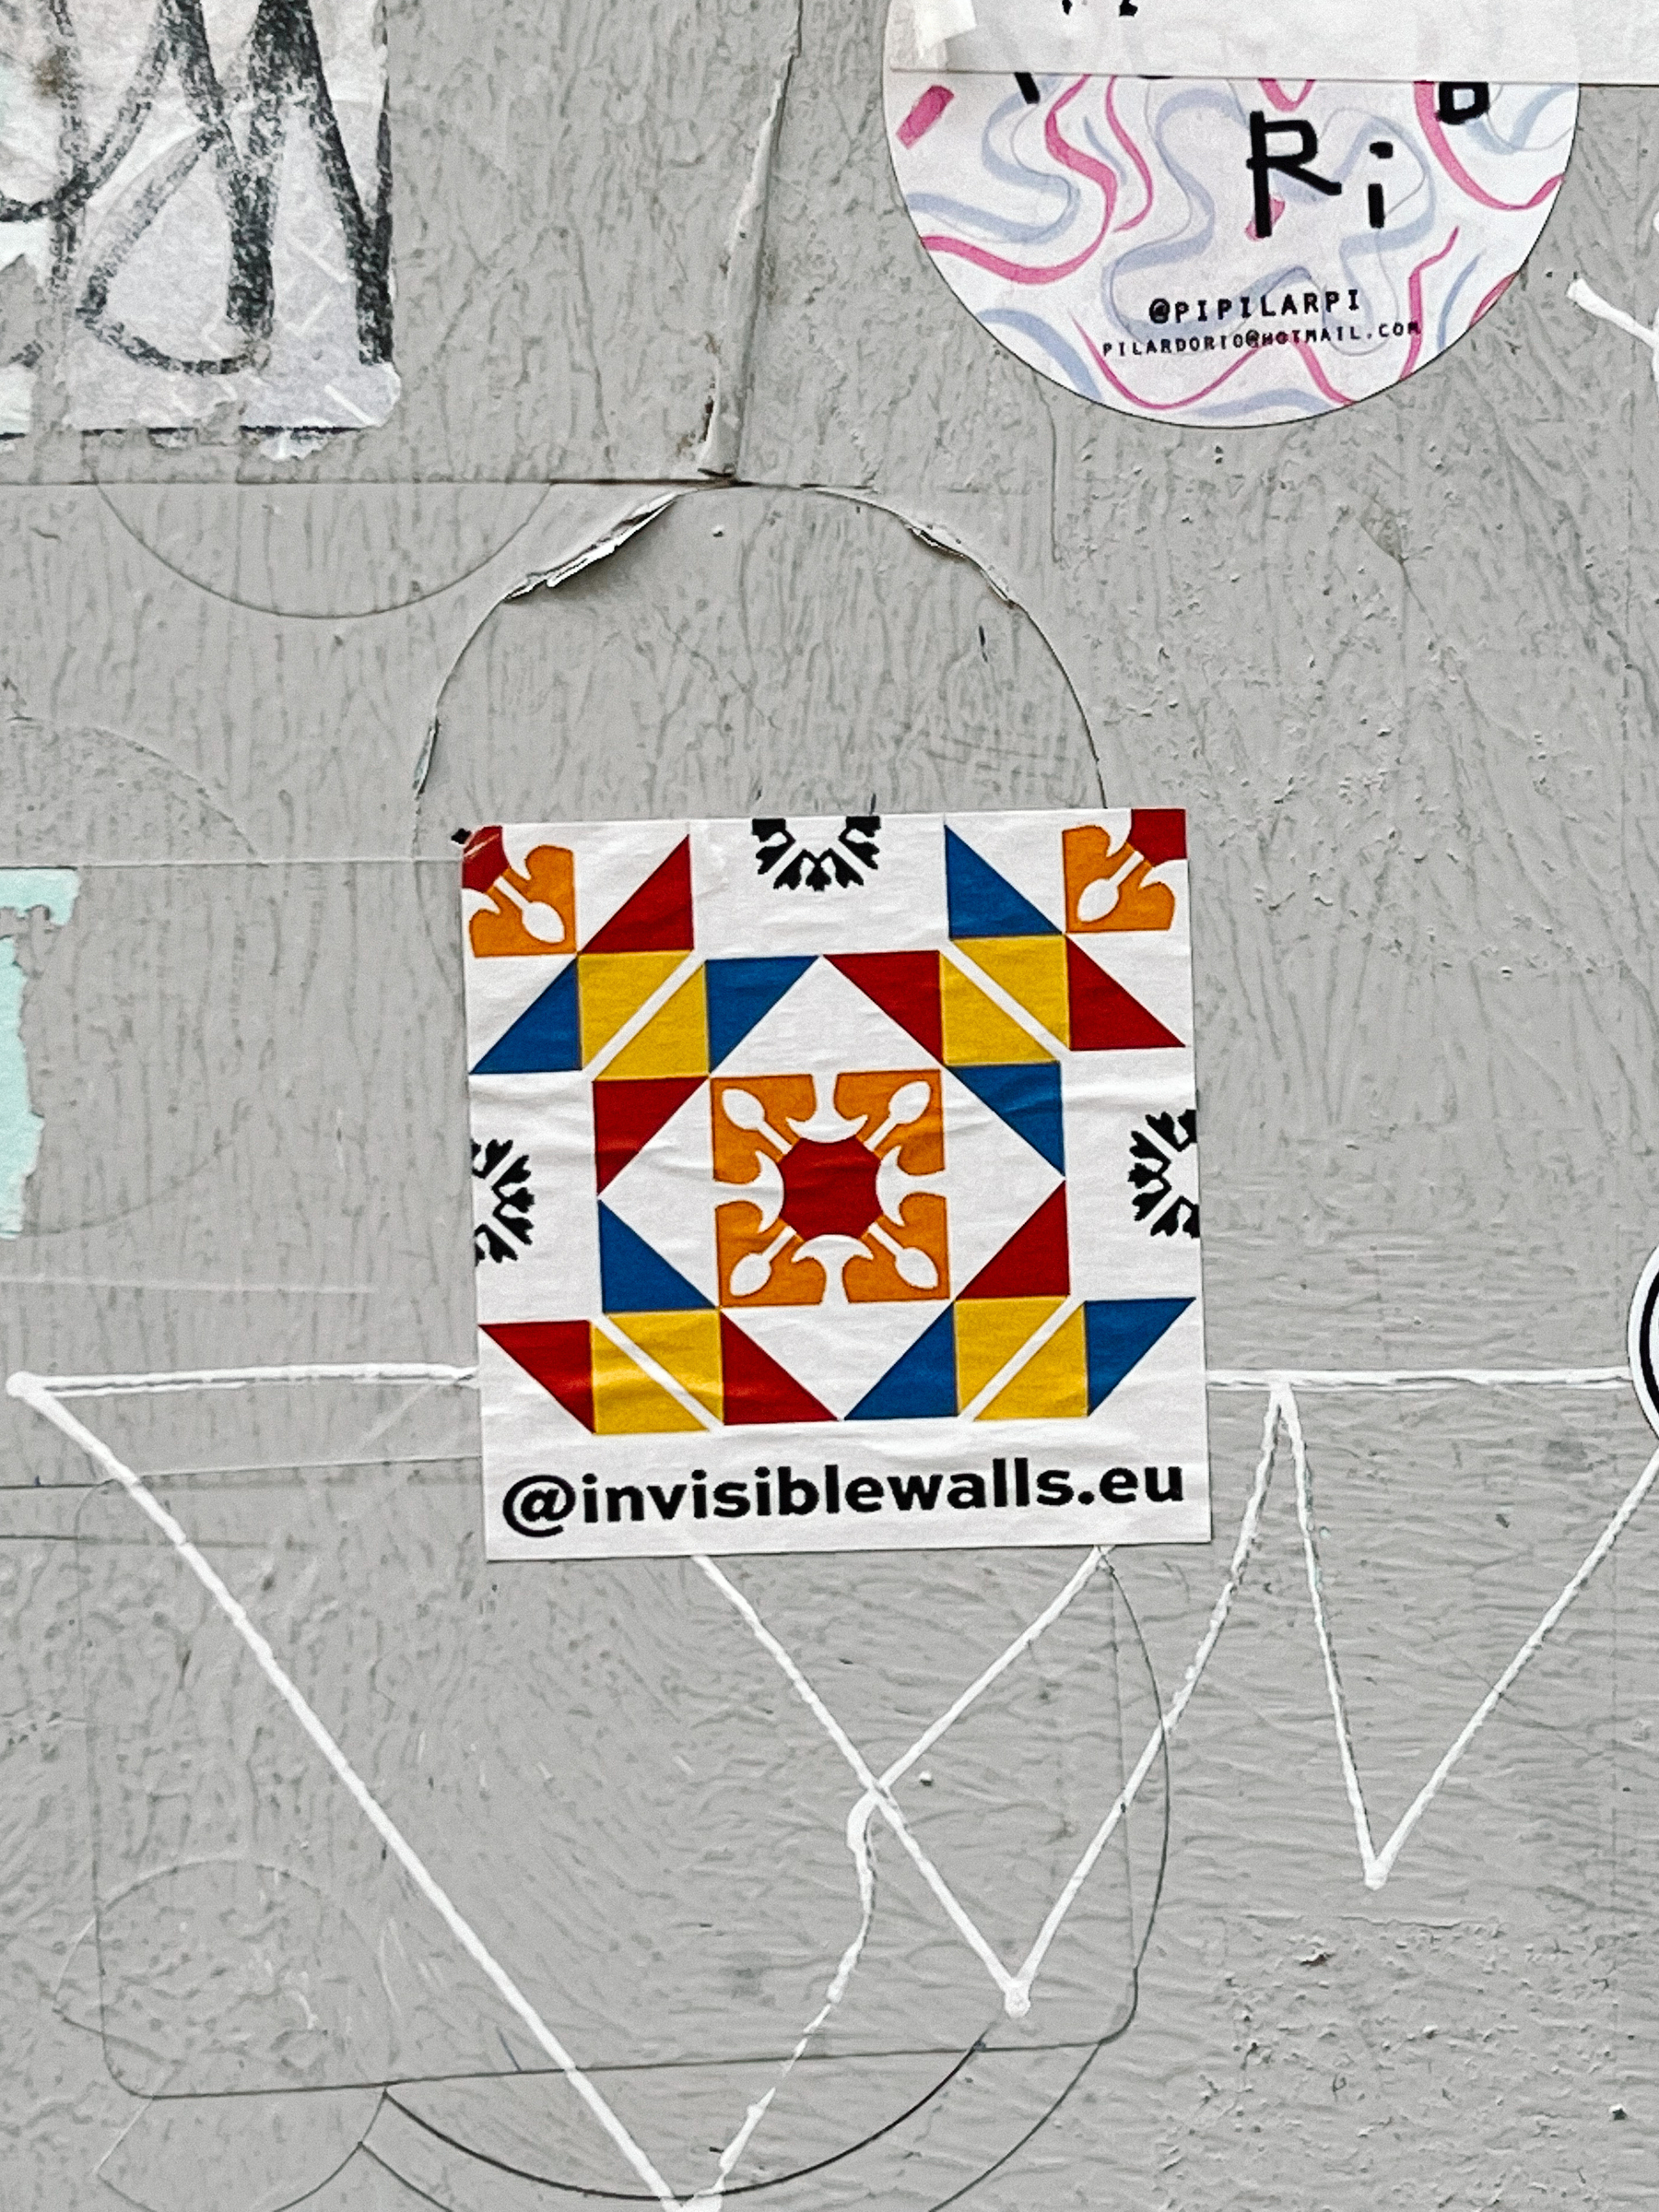 Sticker of what looks a bit like a tile, a colorful one, and “@invisiblewalls.eu” written at the bottom. 